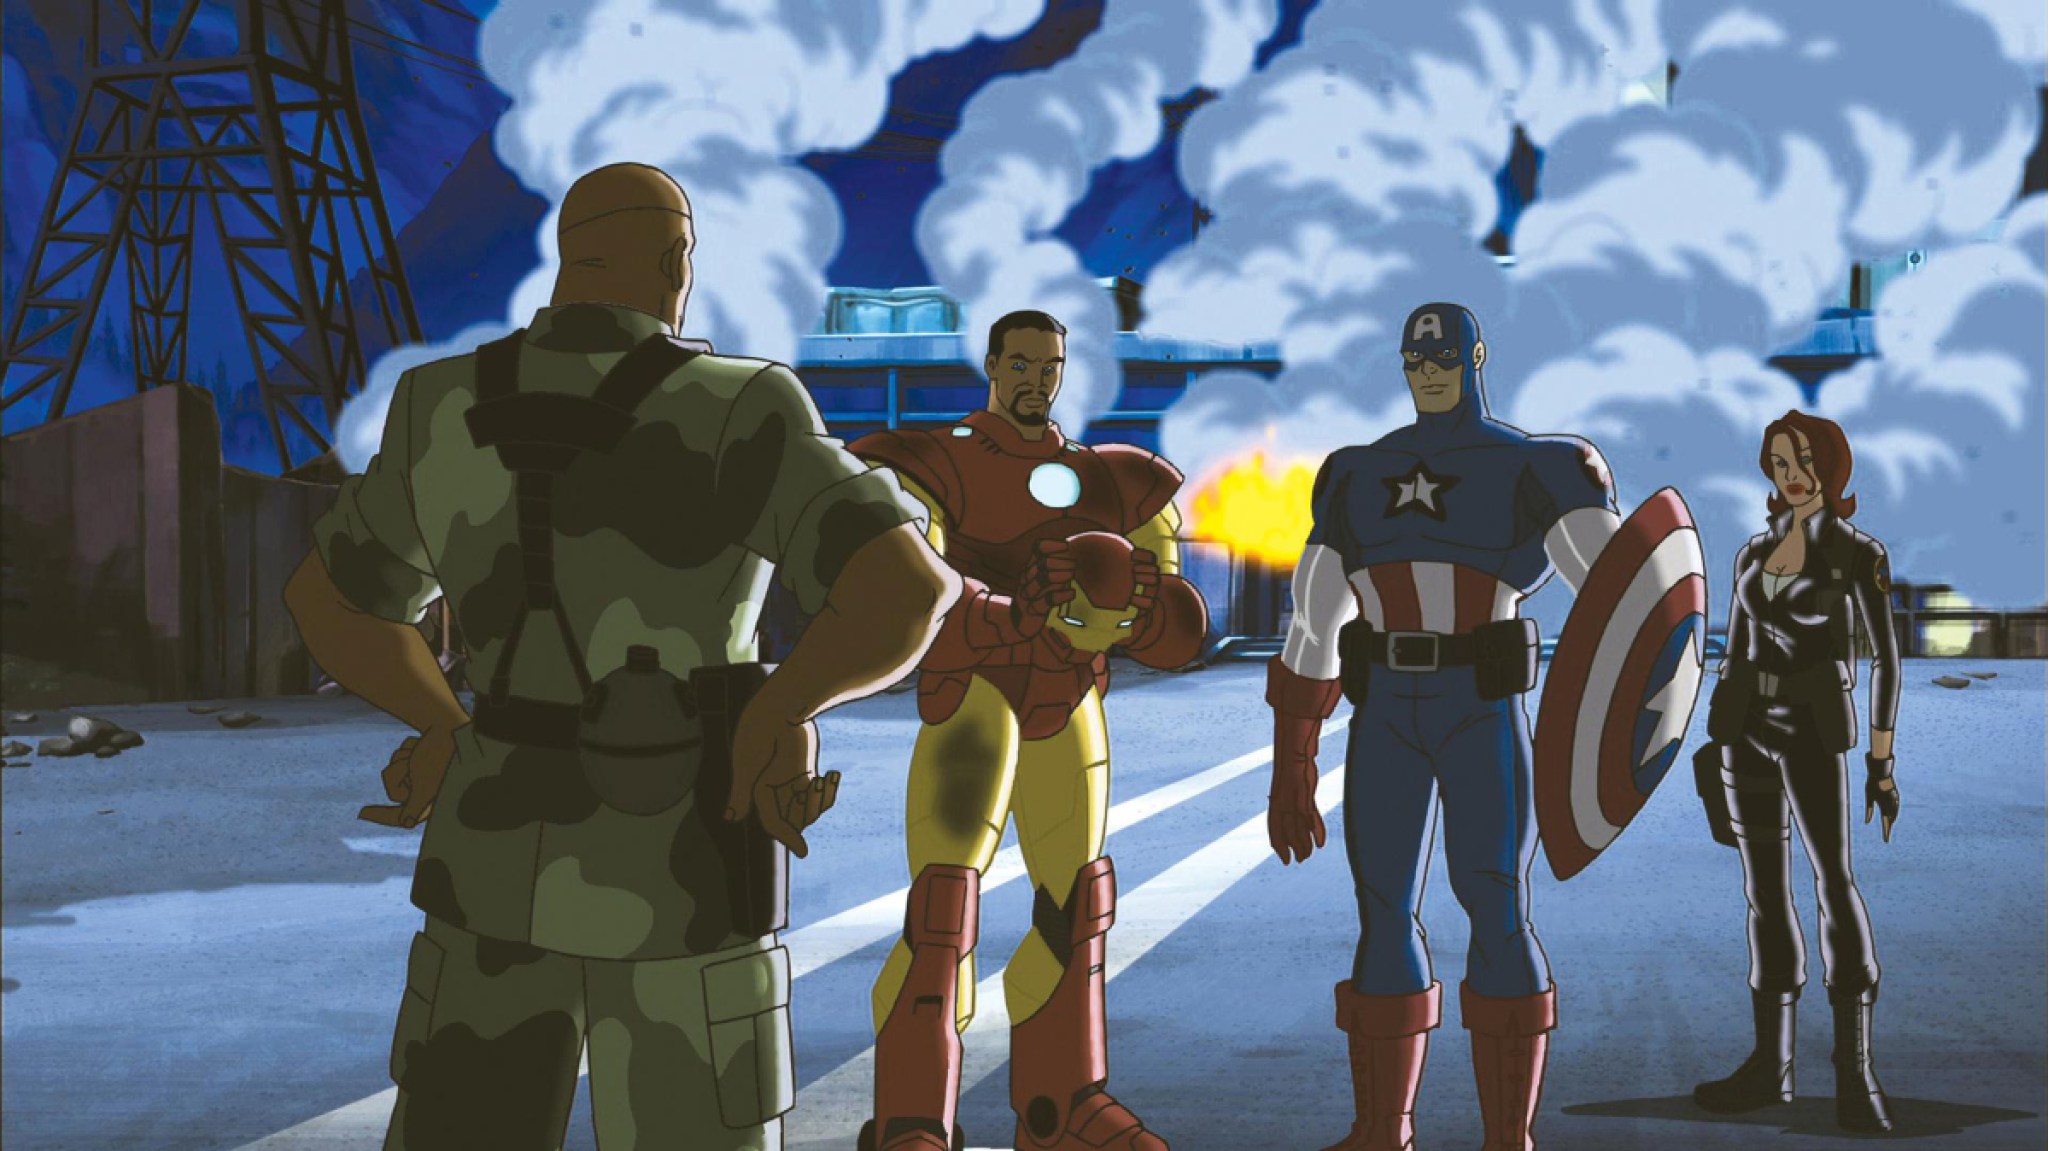 The Avengers assembled in 'Ultimate Avengers'